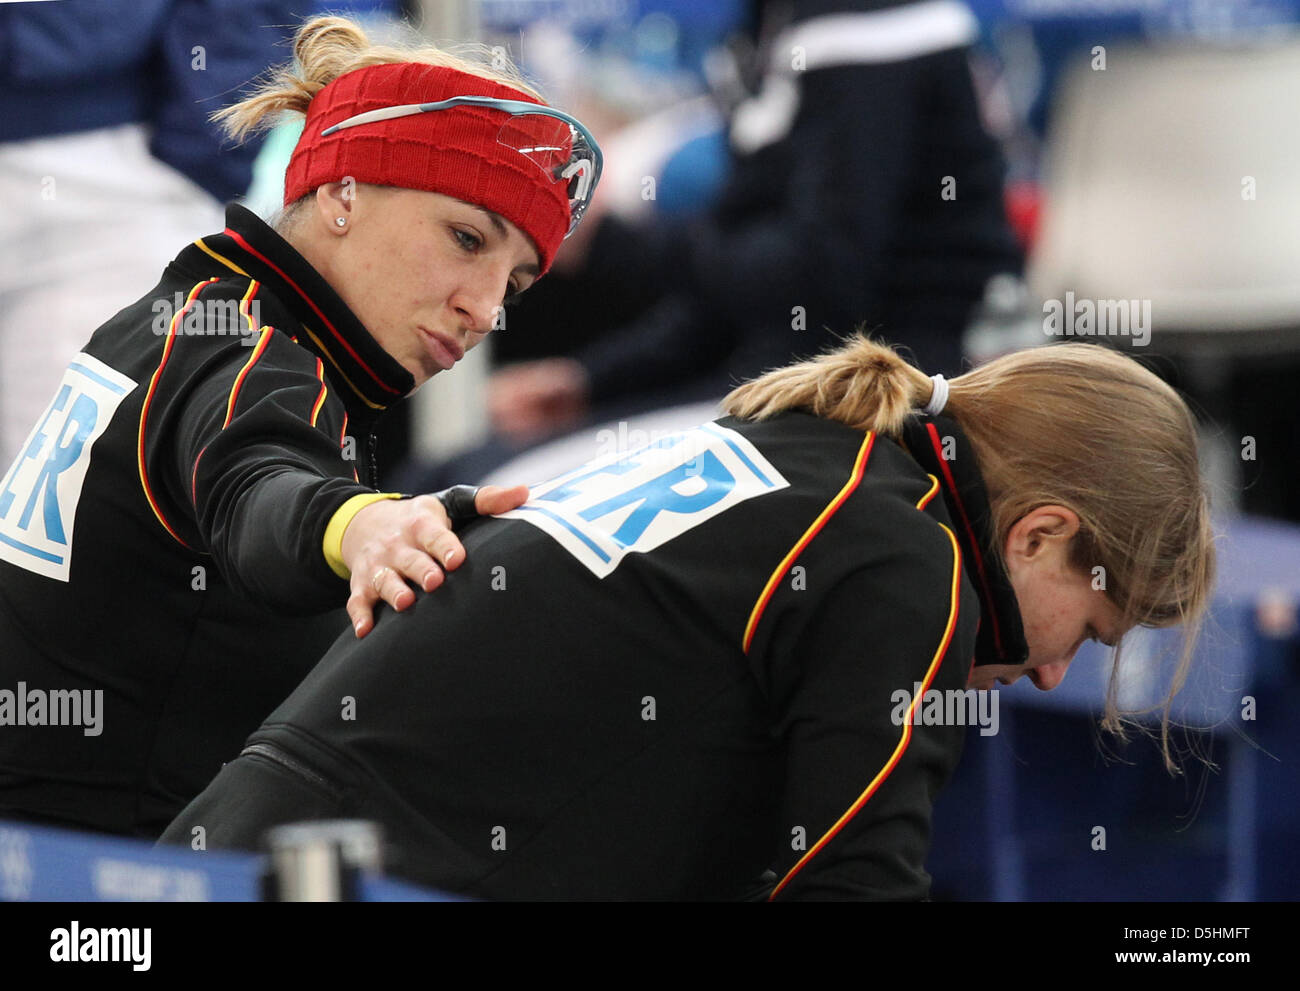 Anni Friesinger-Postma (R) of Germany talks to team mate Jenny Wolf during the Speed Skating women's 1000m at the Richmond Olympic Oval during the Vancouver 2010 Olympic Games, Vancouver, Canada, 18 February 2010.  +++(c) dpa - Bildfunk+++ Stock Photo